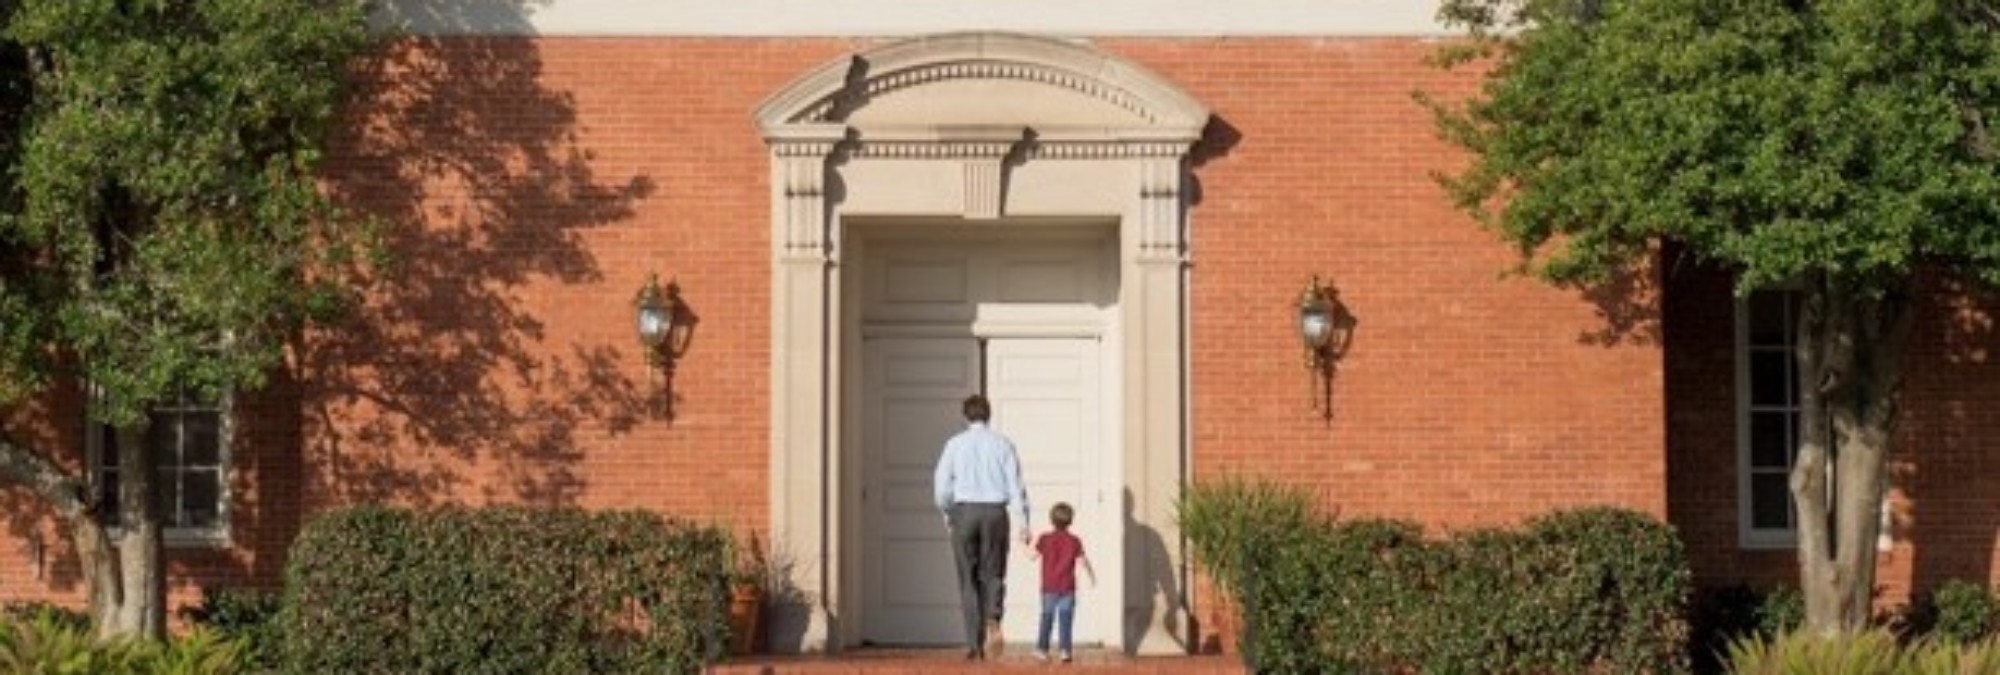 A father and a little kid standing in front of a building